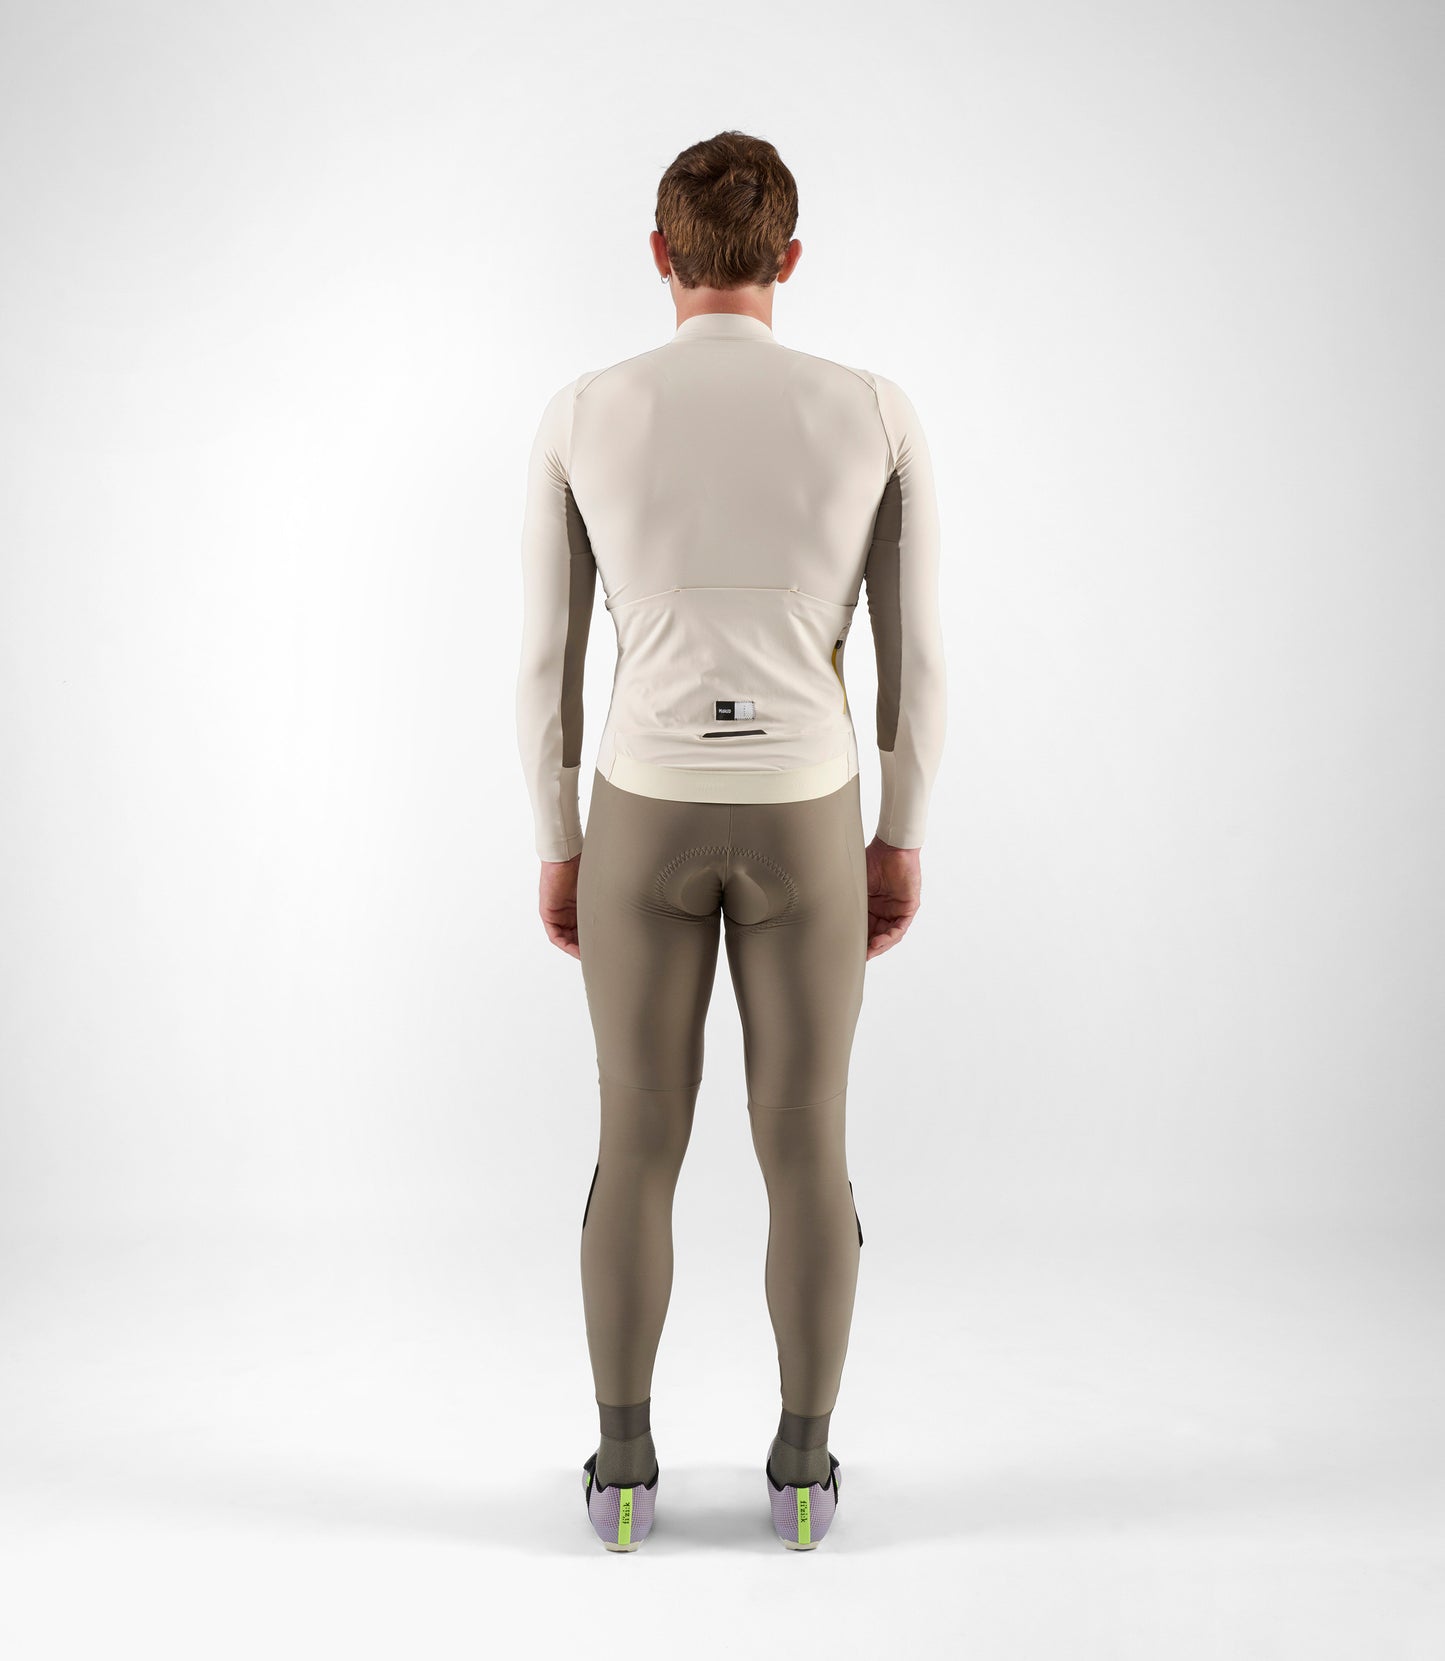 24WJSEL0GPE_3_men cycling jersey long sleeve off white element total body back pedaled